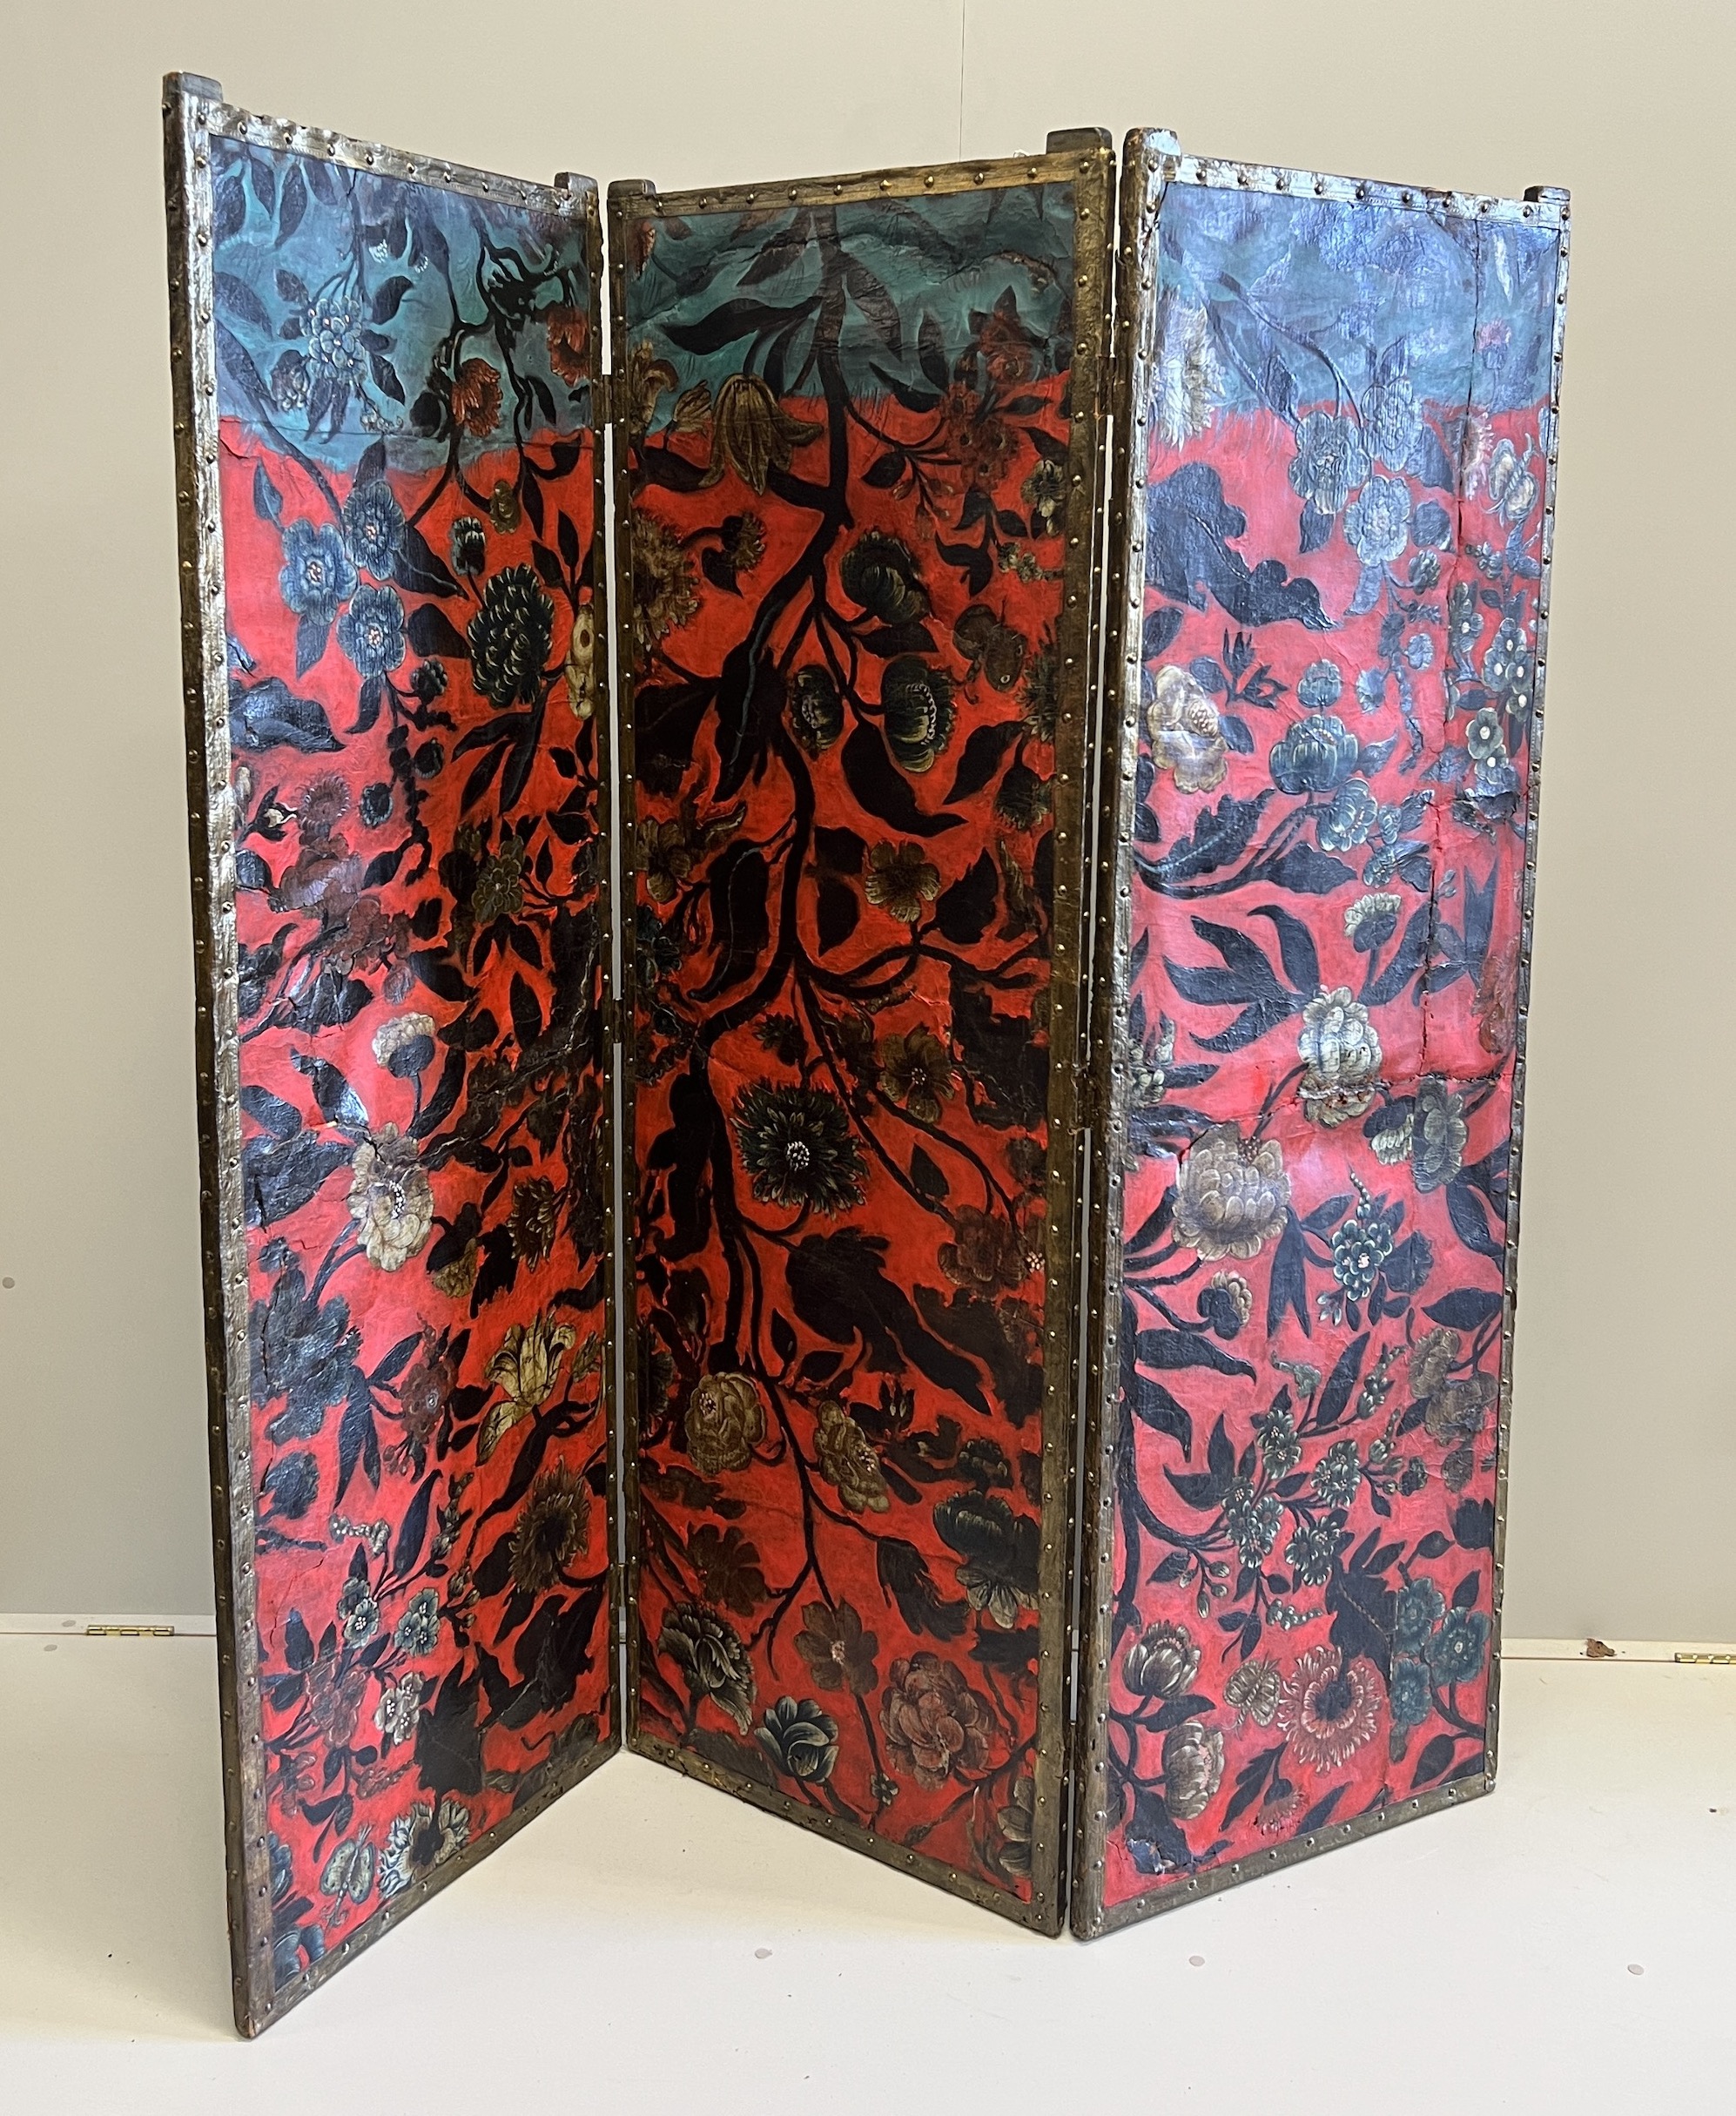 A 19th century Spanish leather three fold dressing screen re-painted by Ricardo Cinalli for the current owner, each panel width 57cm, height 175cm